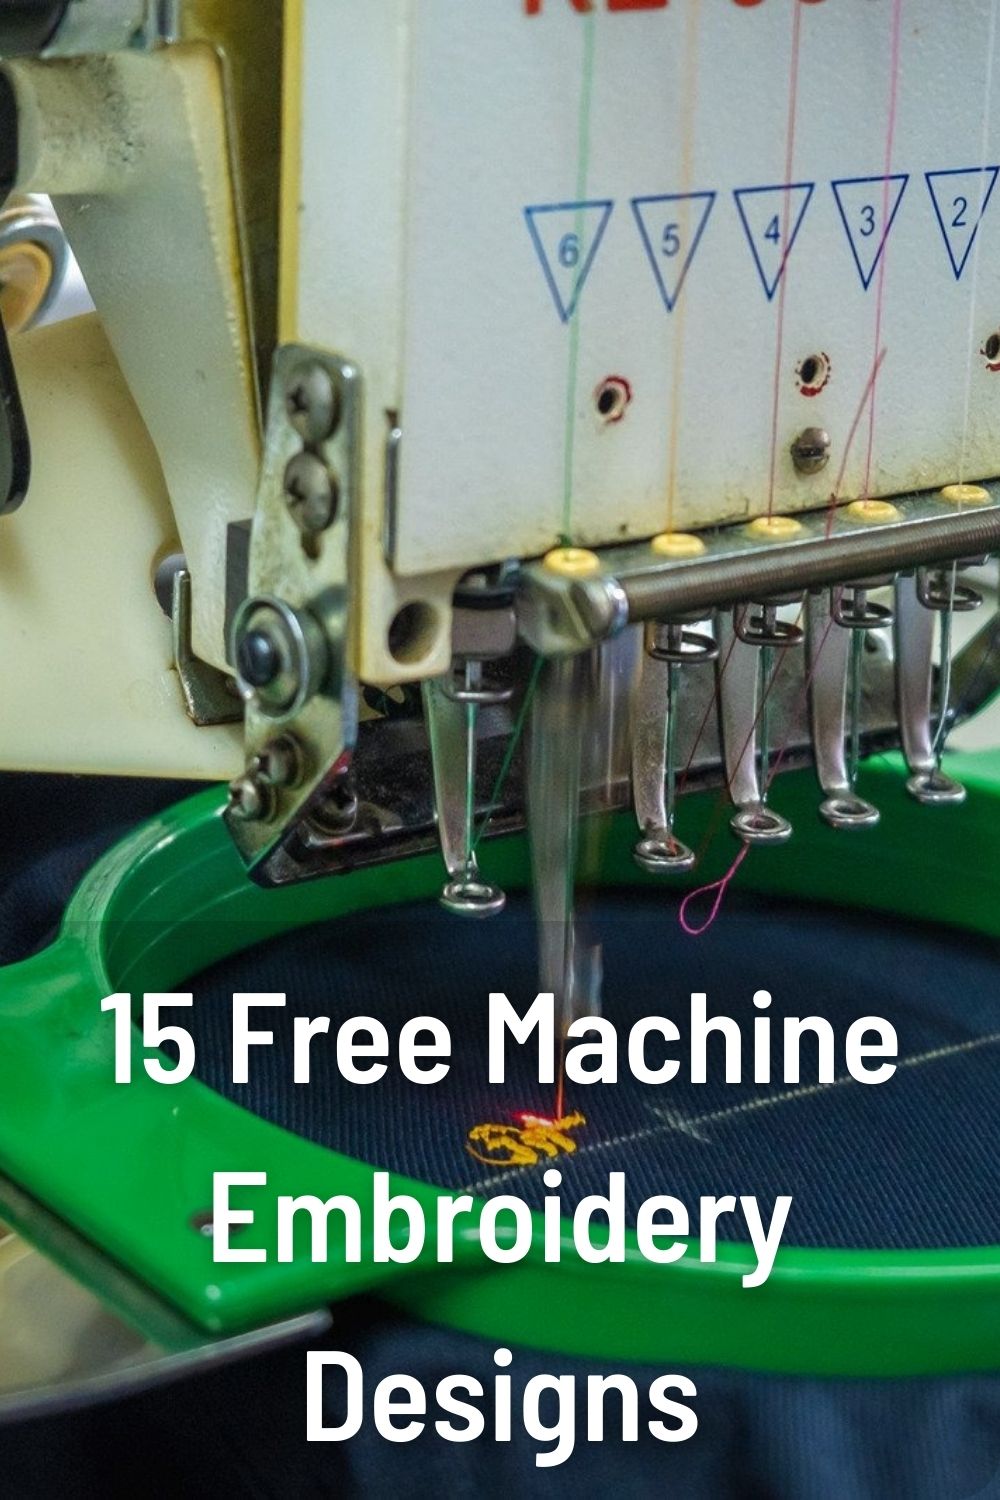 15 Free Machine Embroidery Designs to Download and Use Legally in 2023